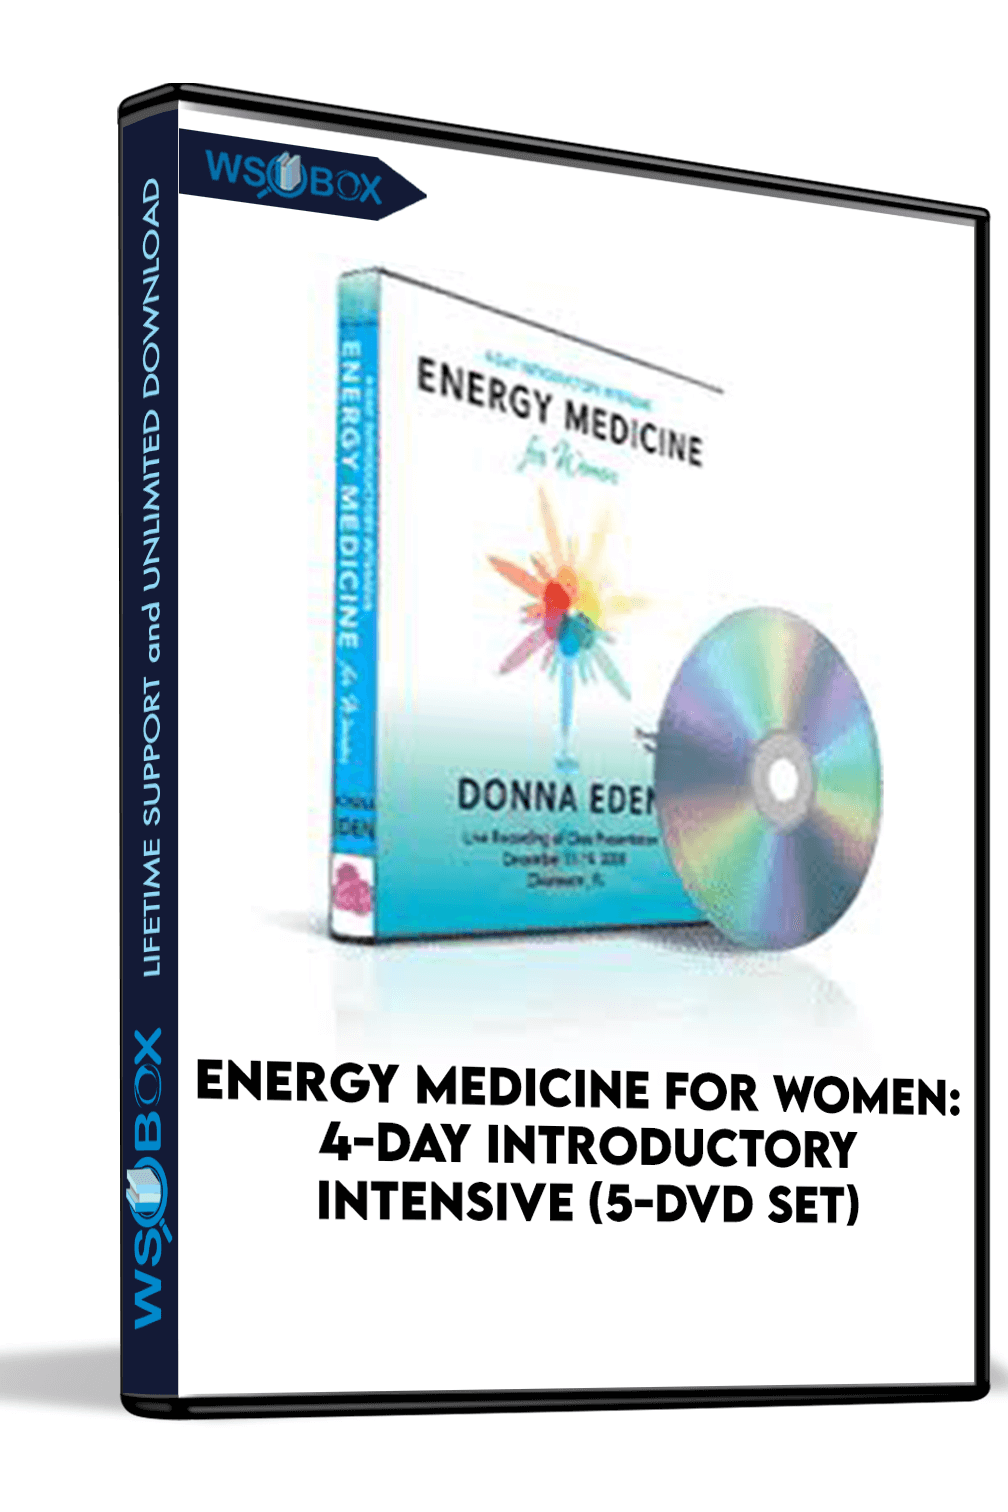 energy-medicine-for-women-4-day-introductory-intensive-5-dvd-set